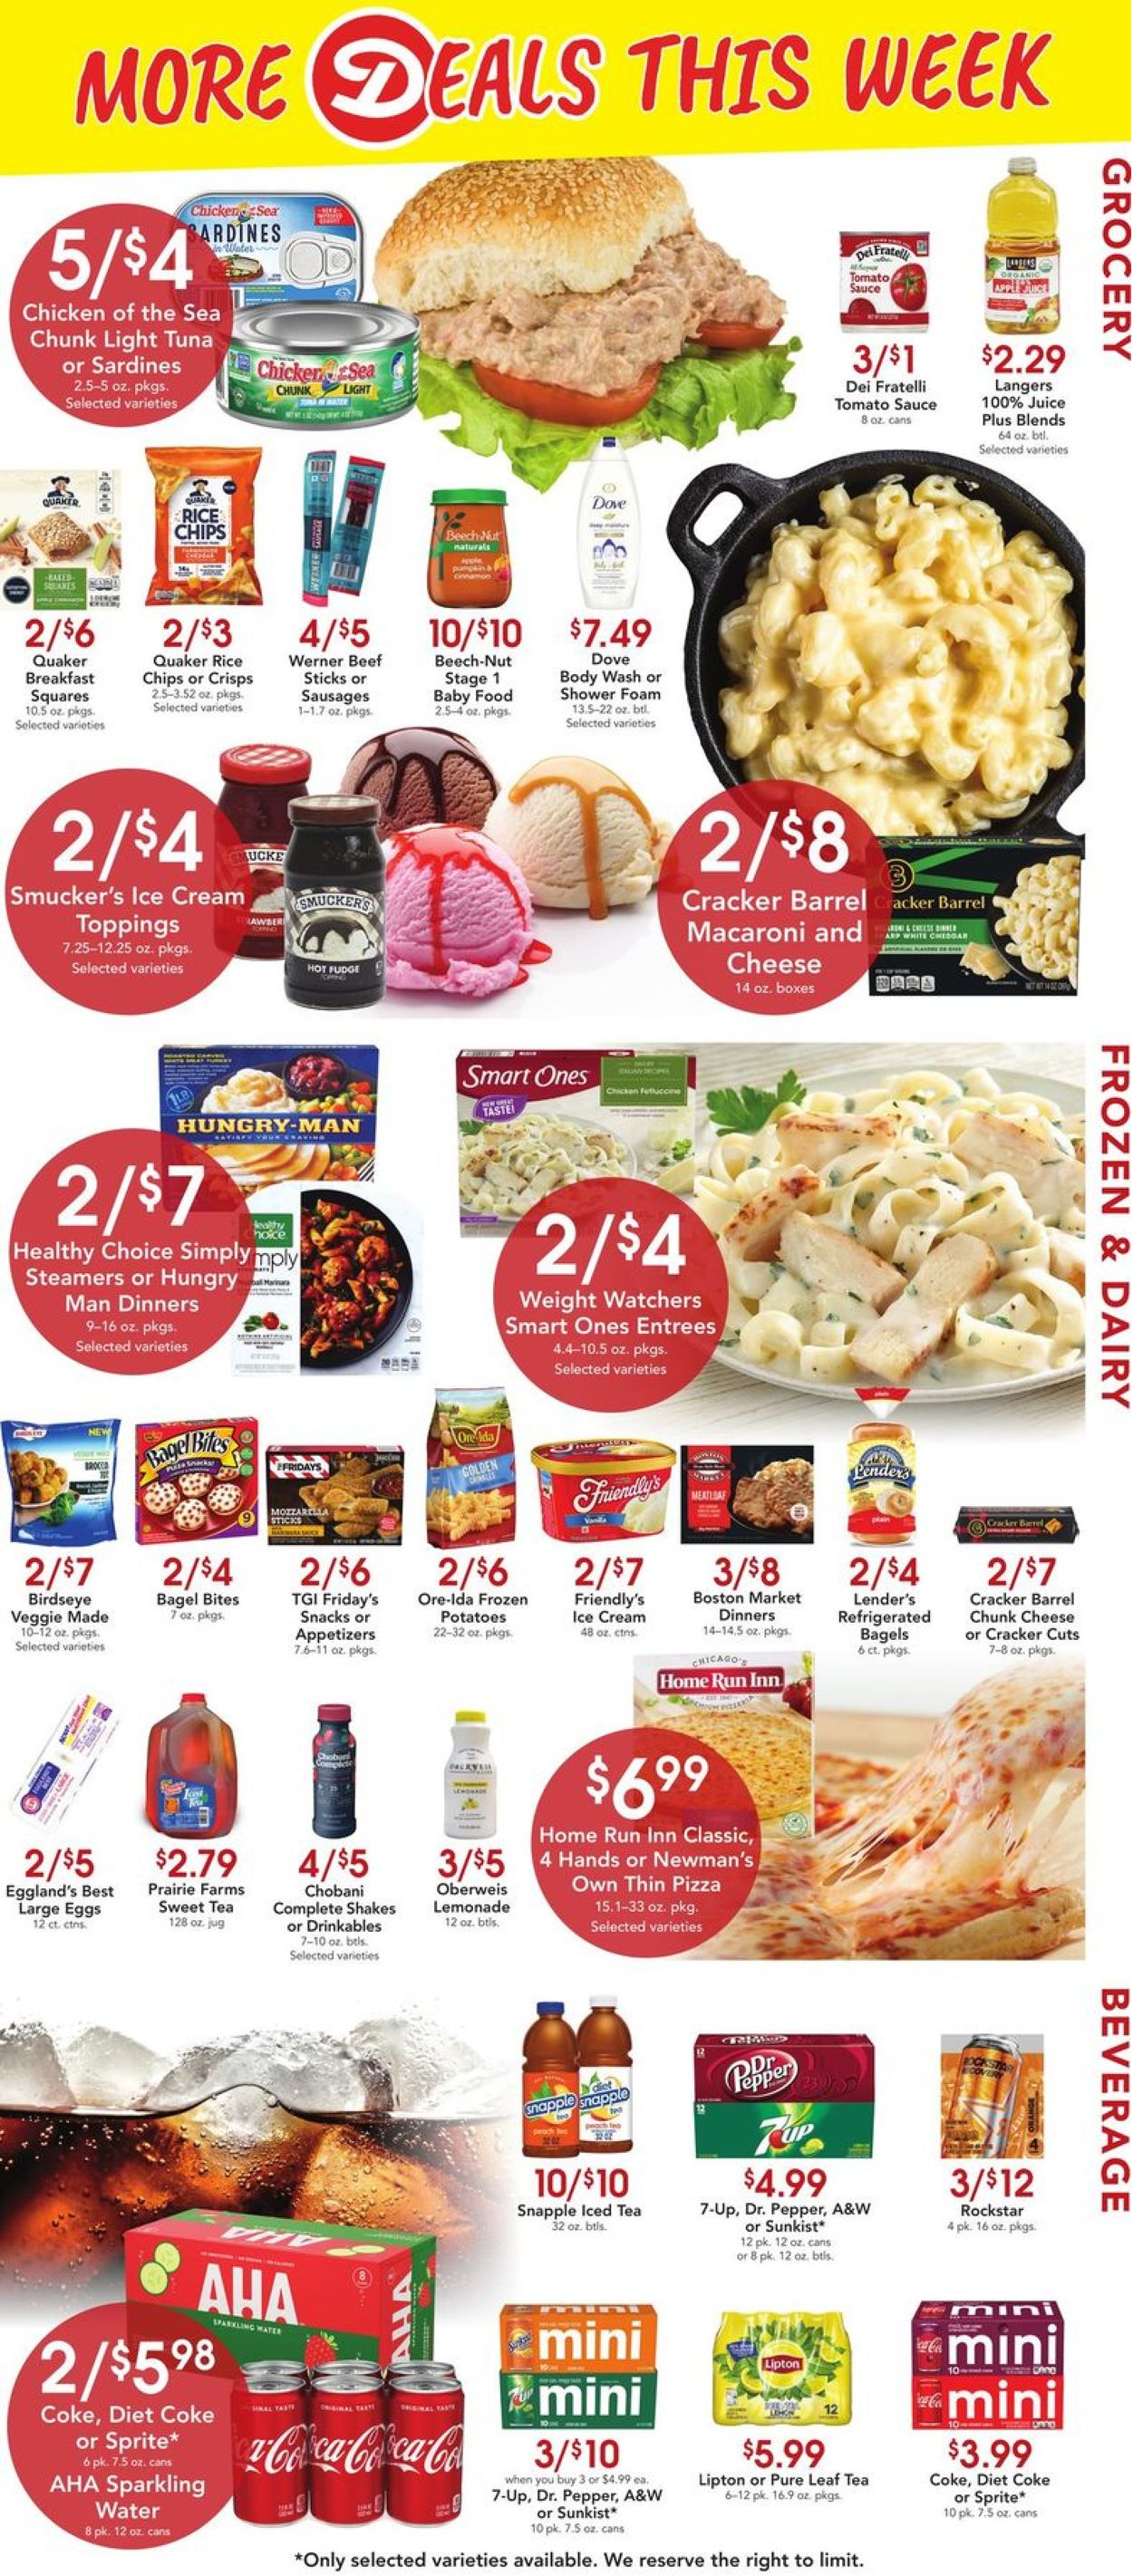 Catalogue Dierbergs from 07/27/2021